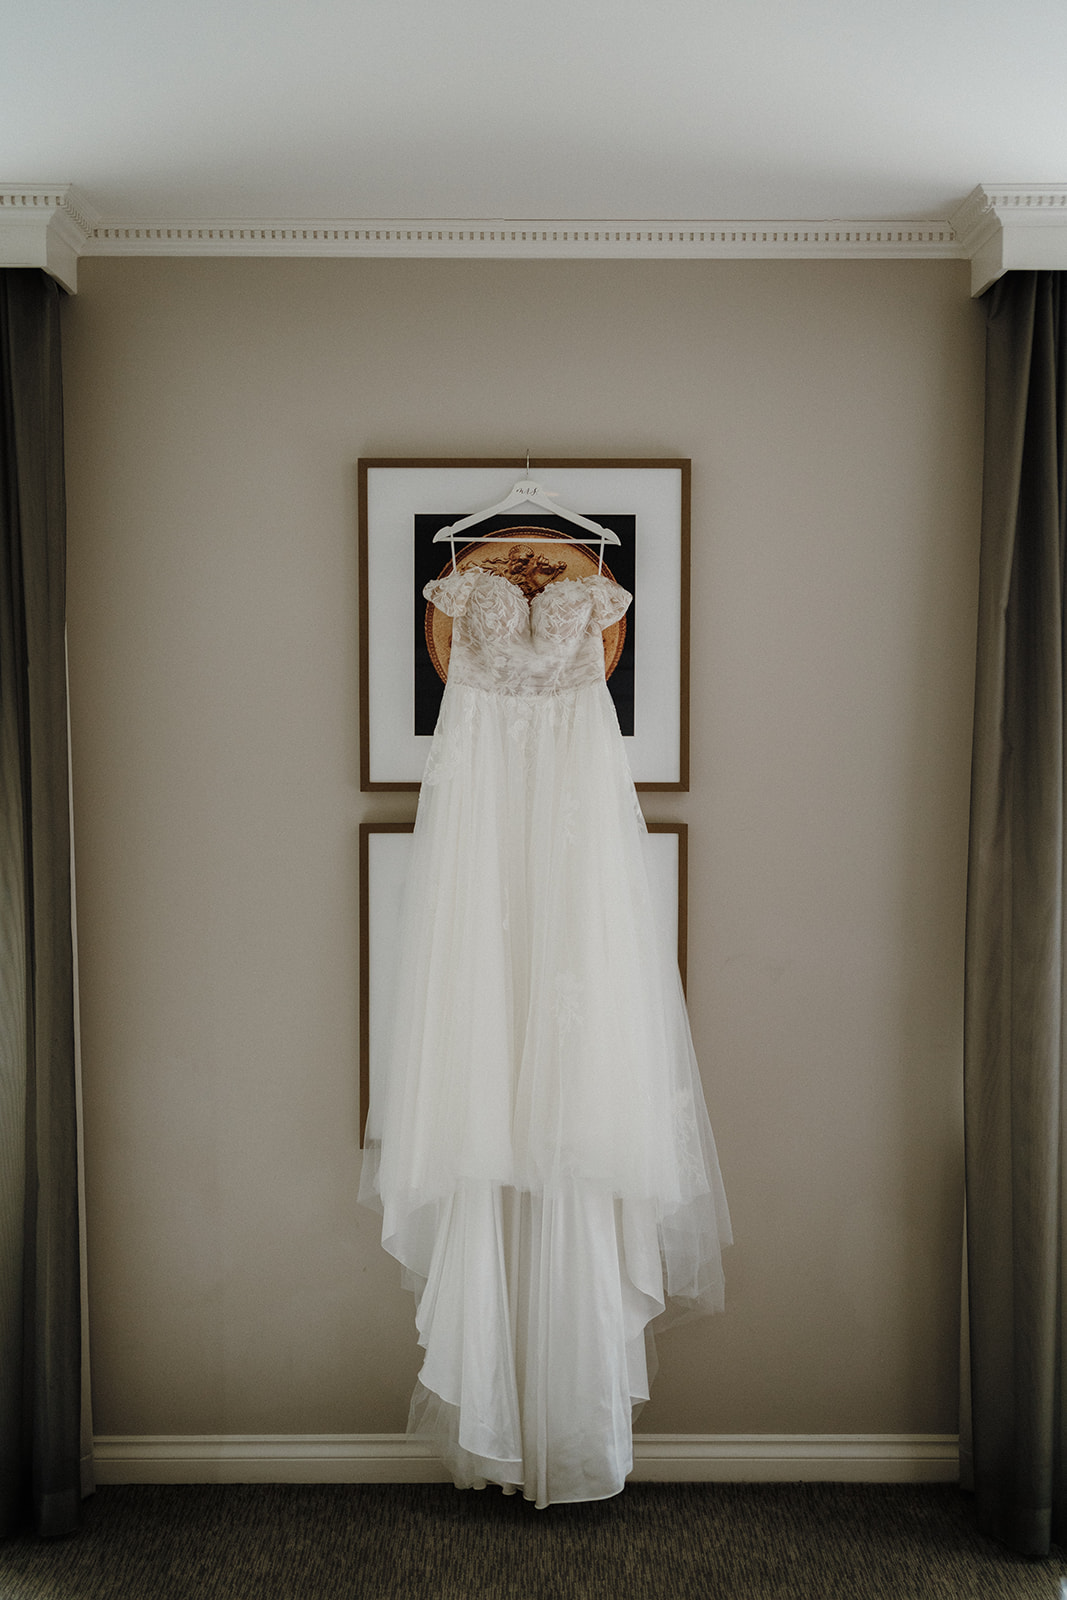 A wedding dress hanging on the wall.